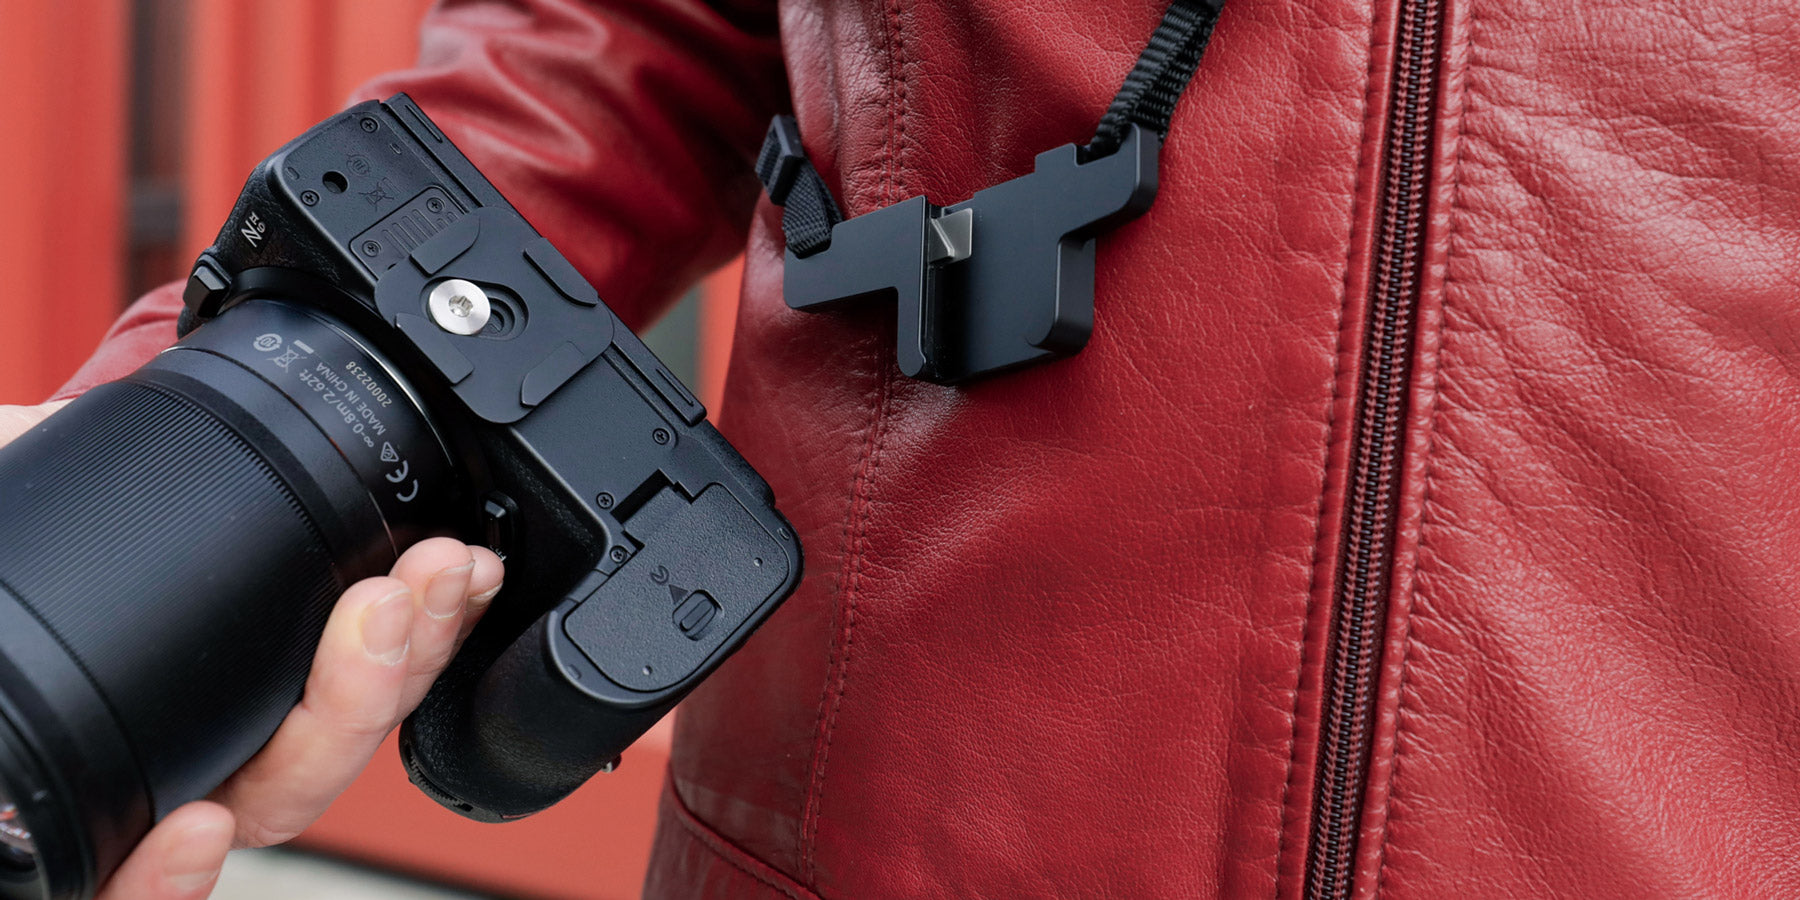 SPINN SWIFT-LOCK – camera carry, next level. Unrivaled handling with any DSLR or mirrorless camera.